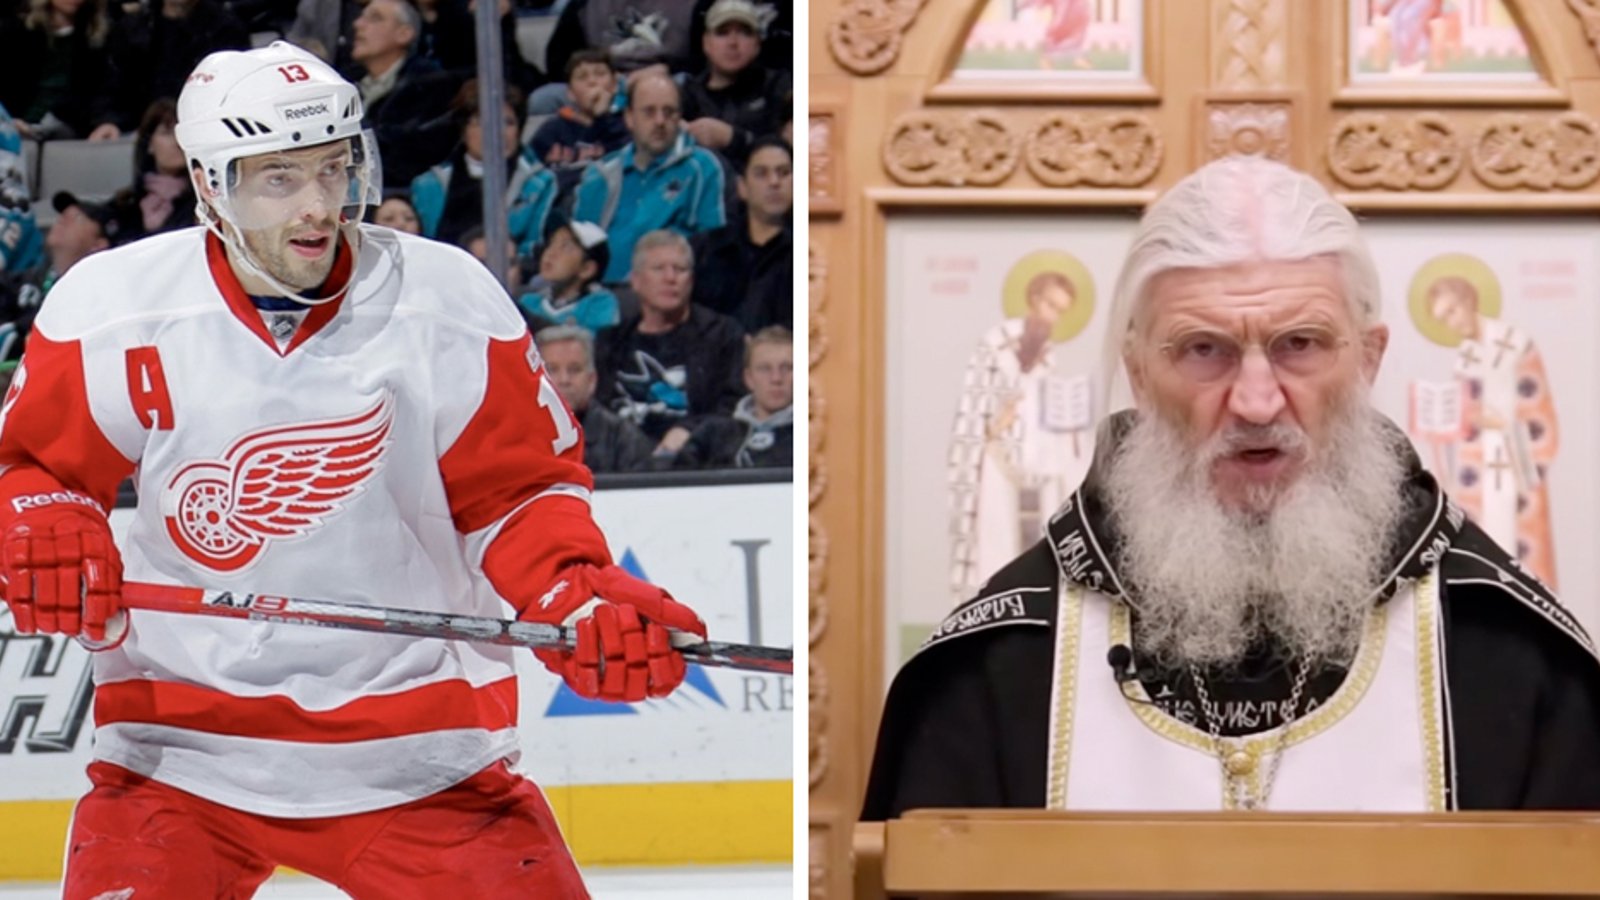 Agent responds after reports that Datsyuk is being held “at a monastery with a priest who claims COVID-19 is a cover-up”  